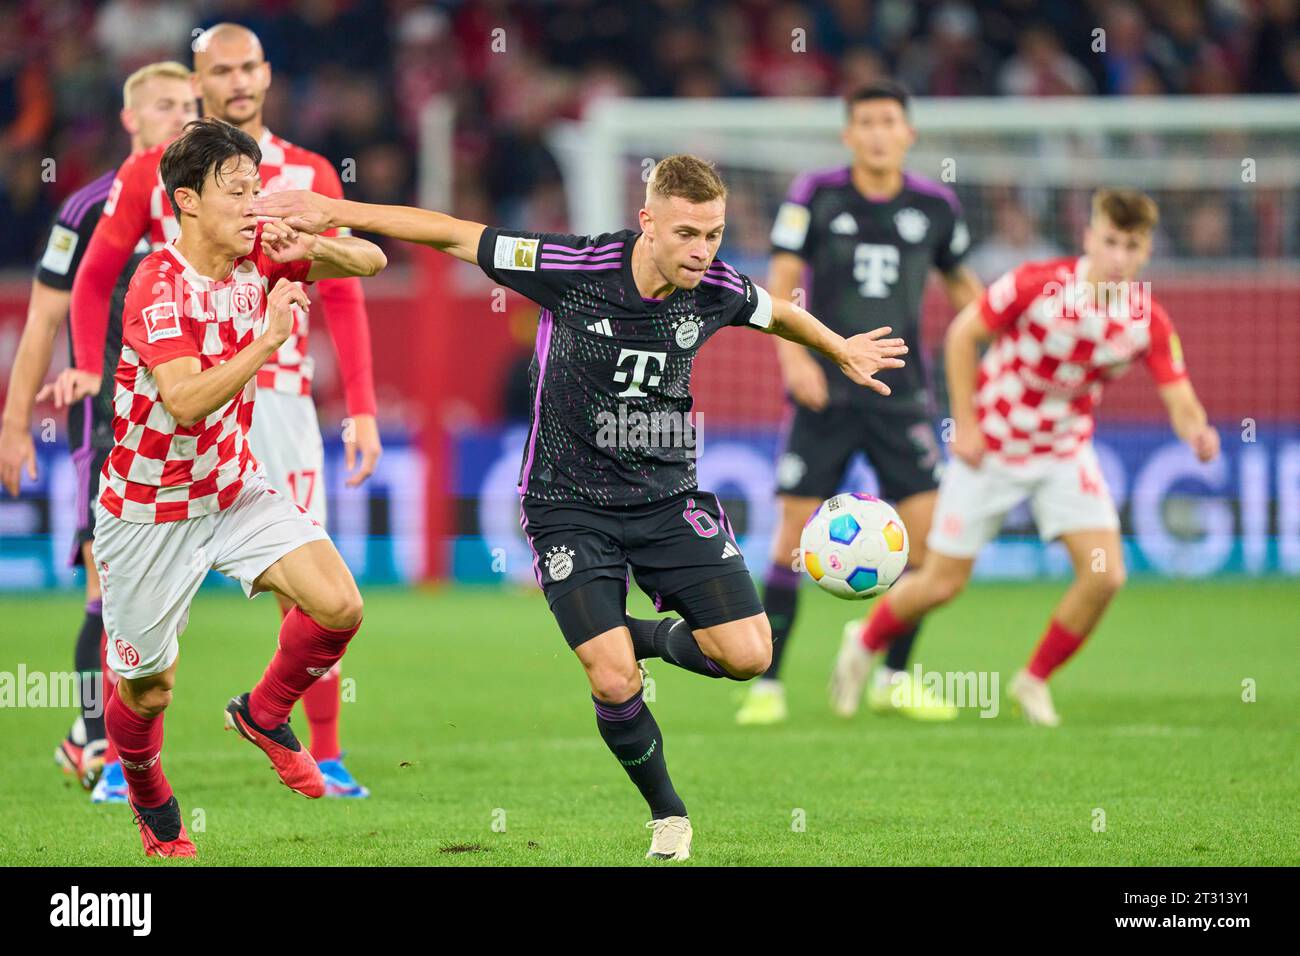 Joshua KIMMICH, FCB 6   compete for the ball, tackling, duel, header, zweikampf, action, fight against Jae-Sung Lee, MZ 7   in the match 1. FSV MAINZ 05 -  FC BAYERN MUENCHEN  1-3  on Oct 21, 2023 in Mainz, Germany. Season 2023/2024, 1.Bundesliga, FCB, München, matchday 8, 8.Spieltag © Peter Schatz / Alamy Live News    - DFL REGULATIONS PROHIBIT ANY USE OF PHOTOGRAPHS as IMAGE SEQUENCES and/or QUASI-VIDEO - Stock Photo